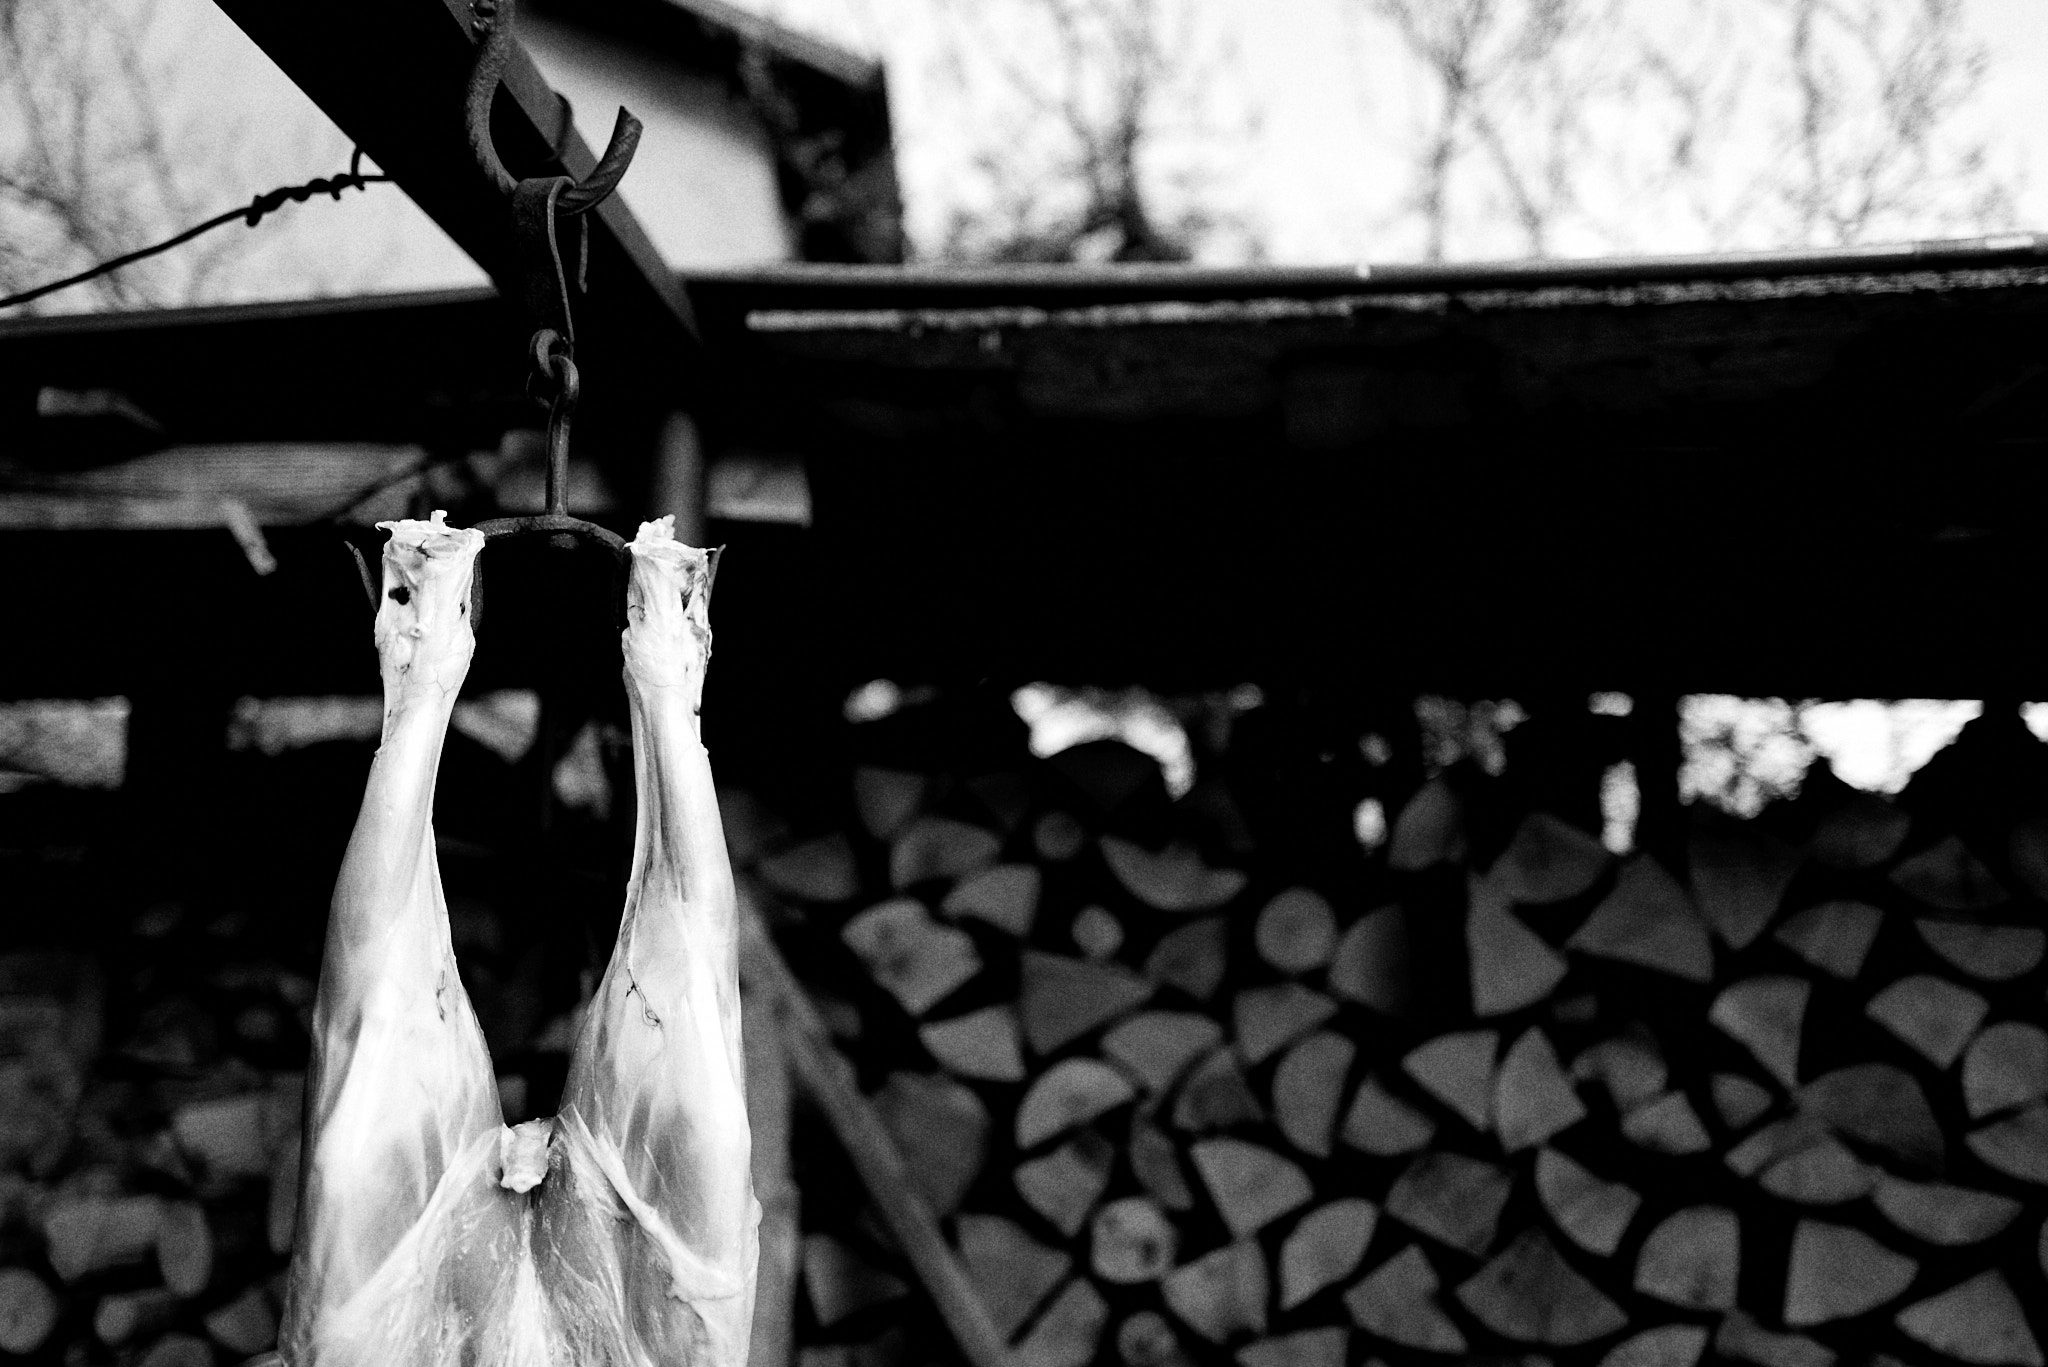 The lamb hangs upside down in order for all the blood to run out, Yarlovo, Bulgaria 2021 © Asen Velichkov